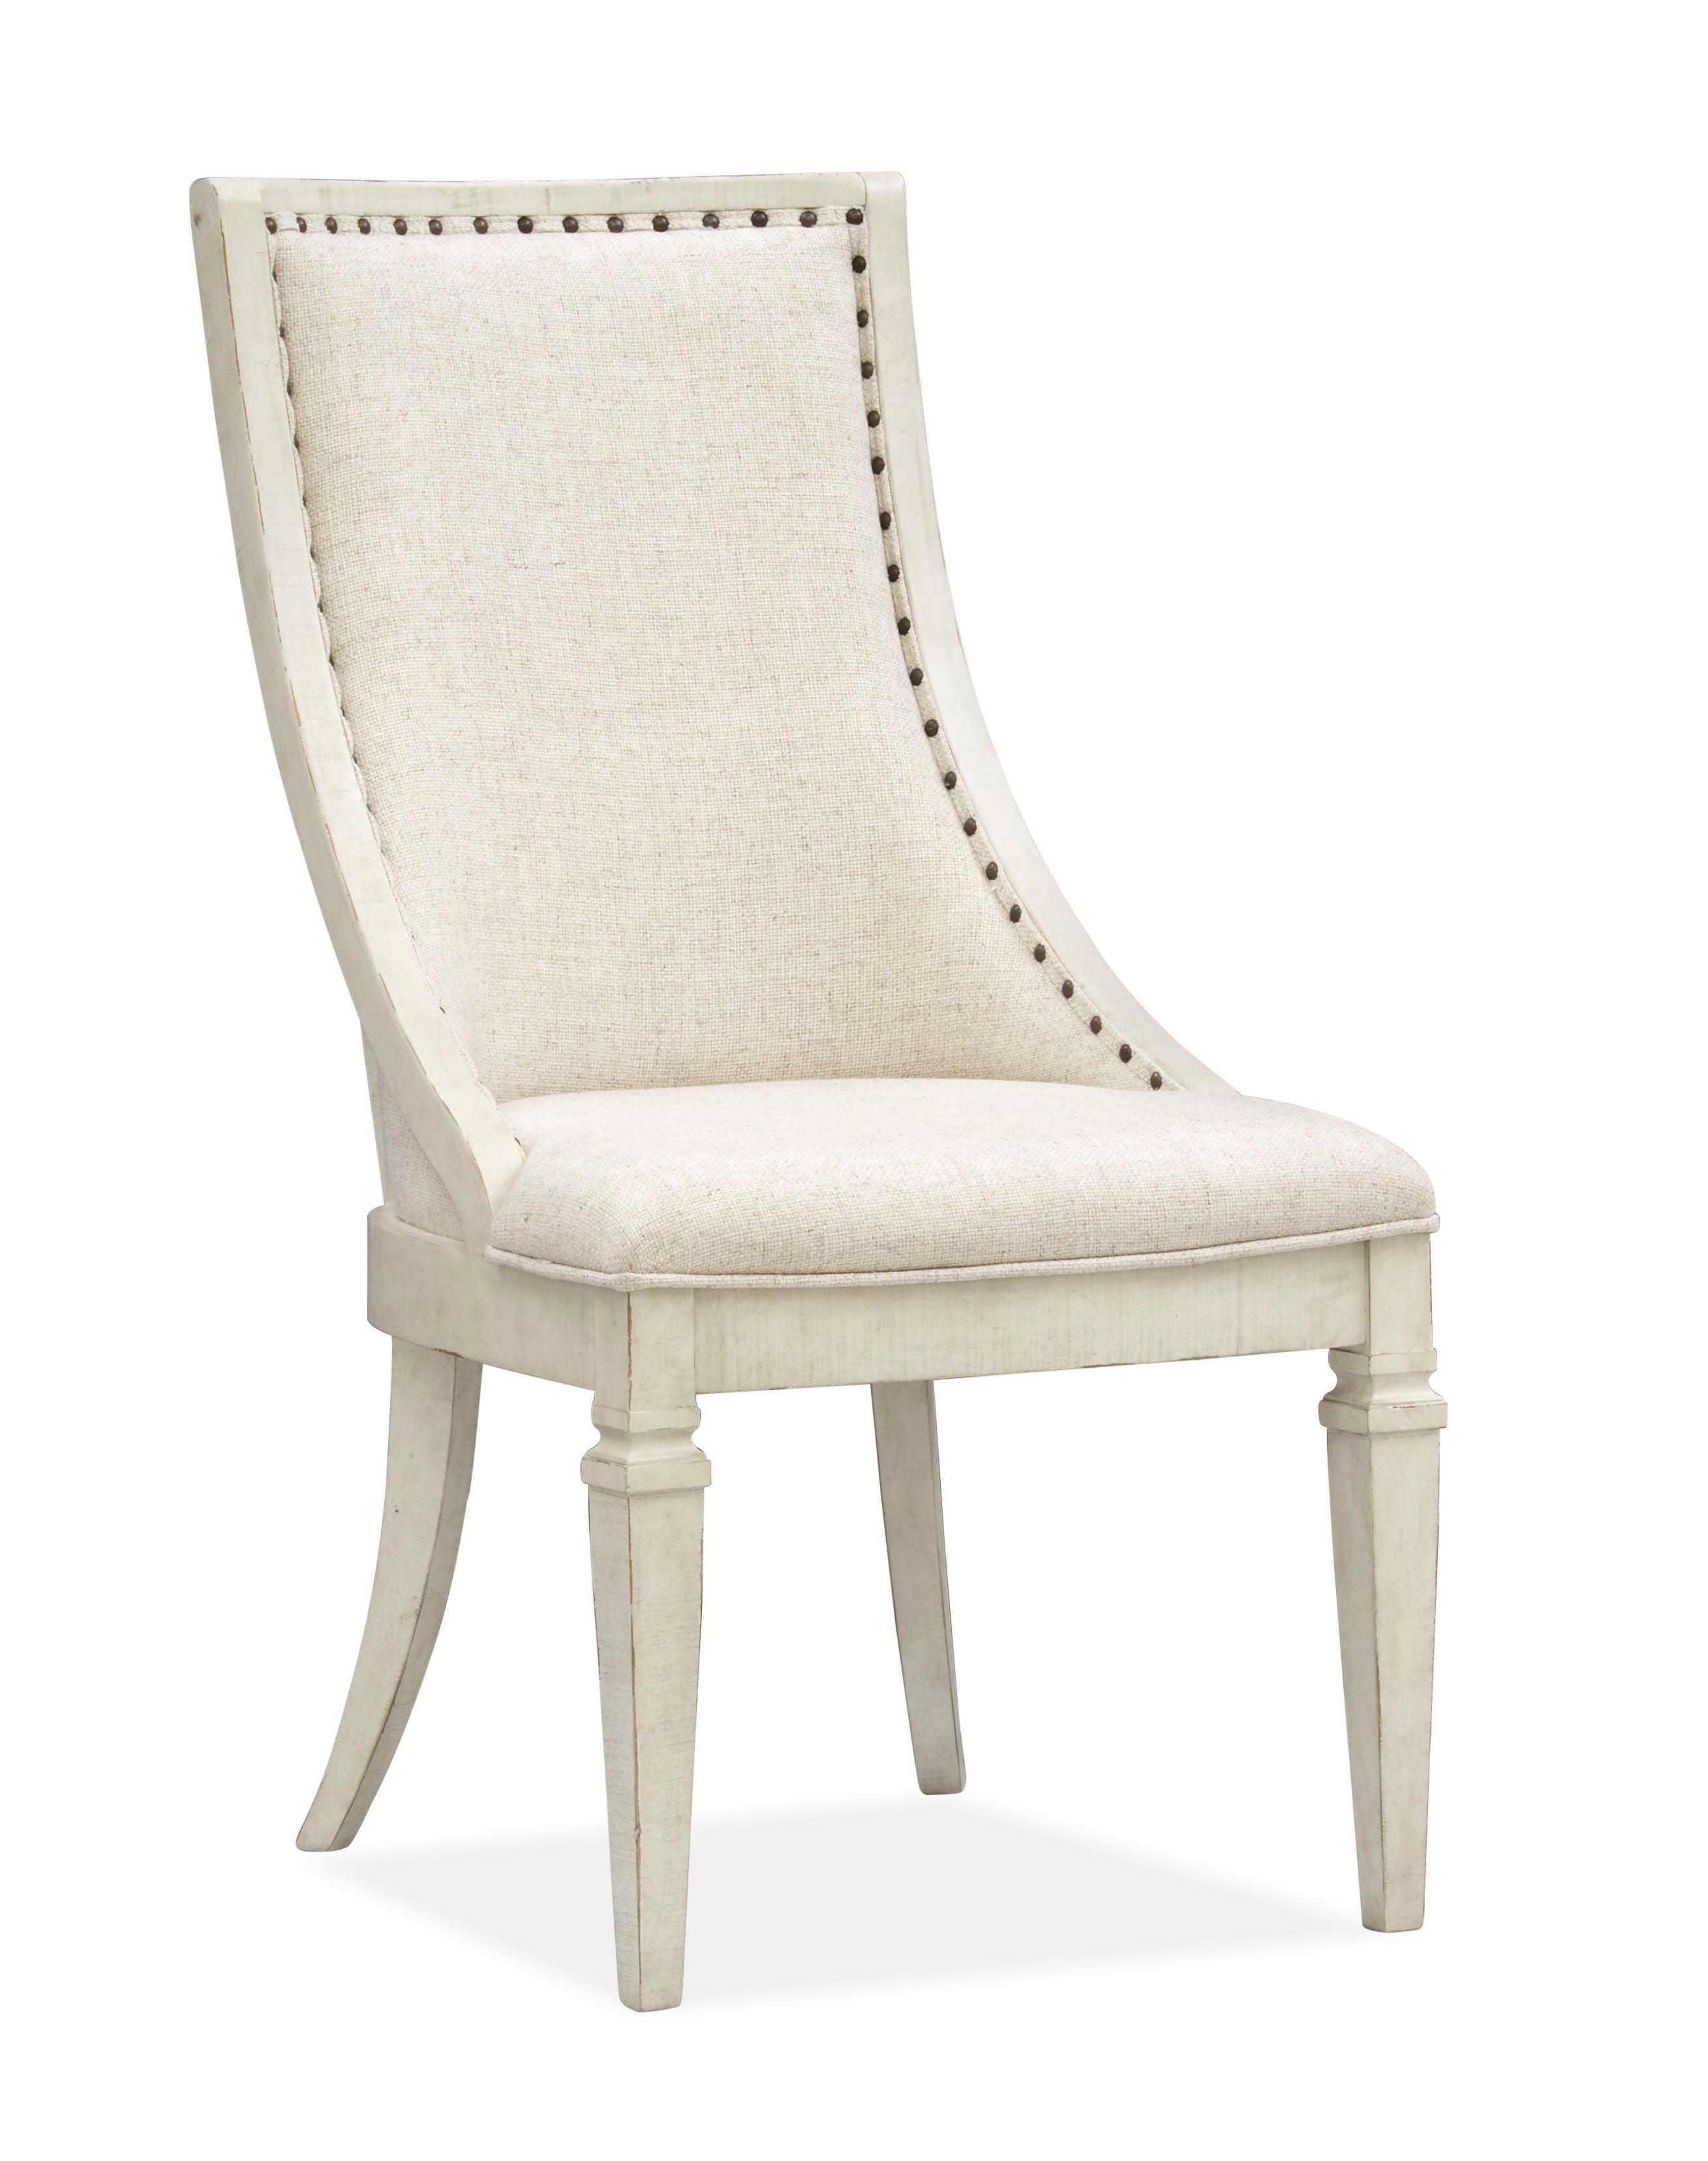 Magnussen Furniture - Newport - Dining Arm Chair With Upholstered Seat & Back (Set of 2) - Alabaster - 5th Avenue Furniture